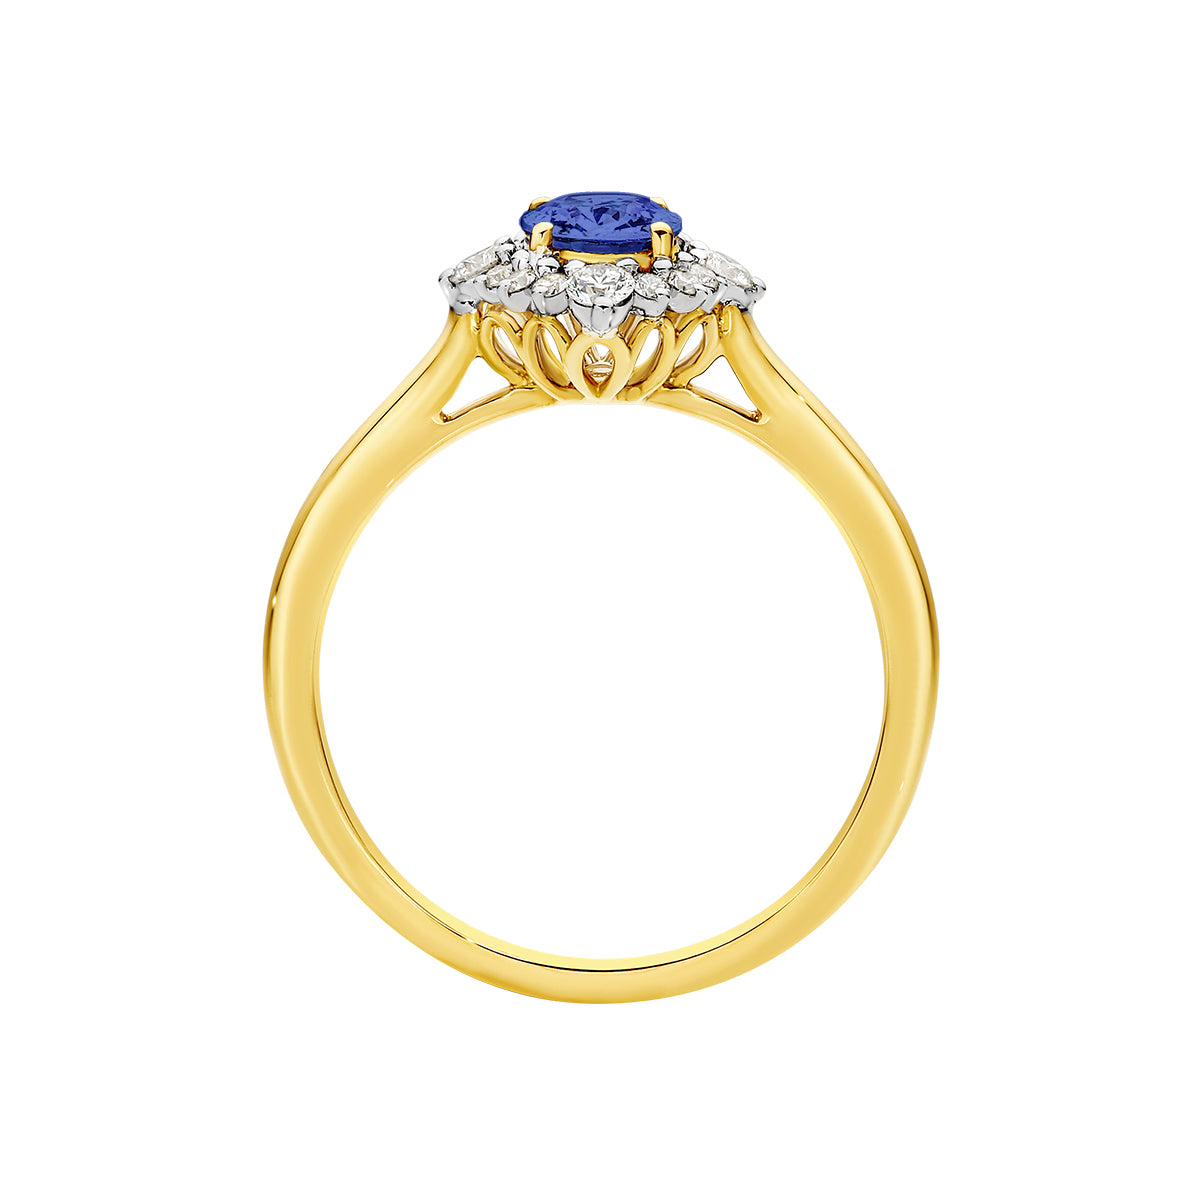 Natural 0.90ct oval Ceylon Sapphire & 0.28ct diamond Sunrise ring in 9ct yellow and white gold.